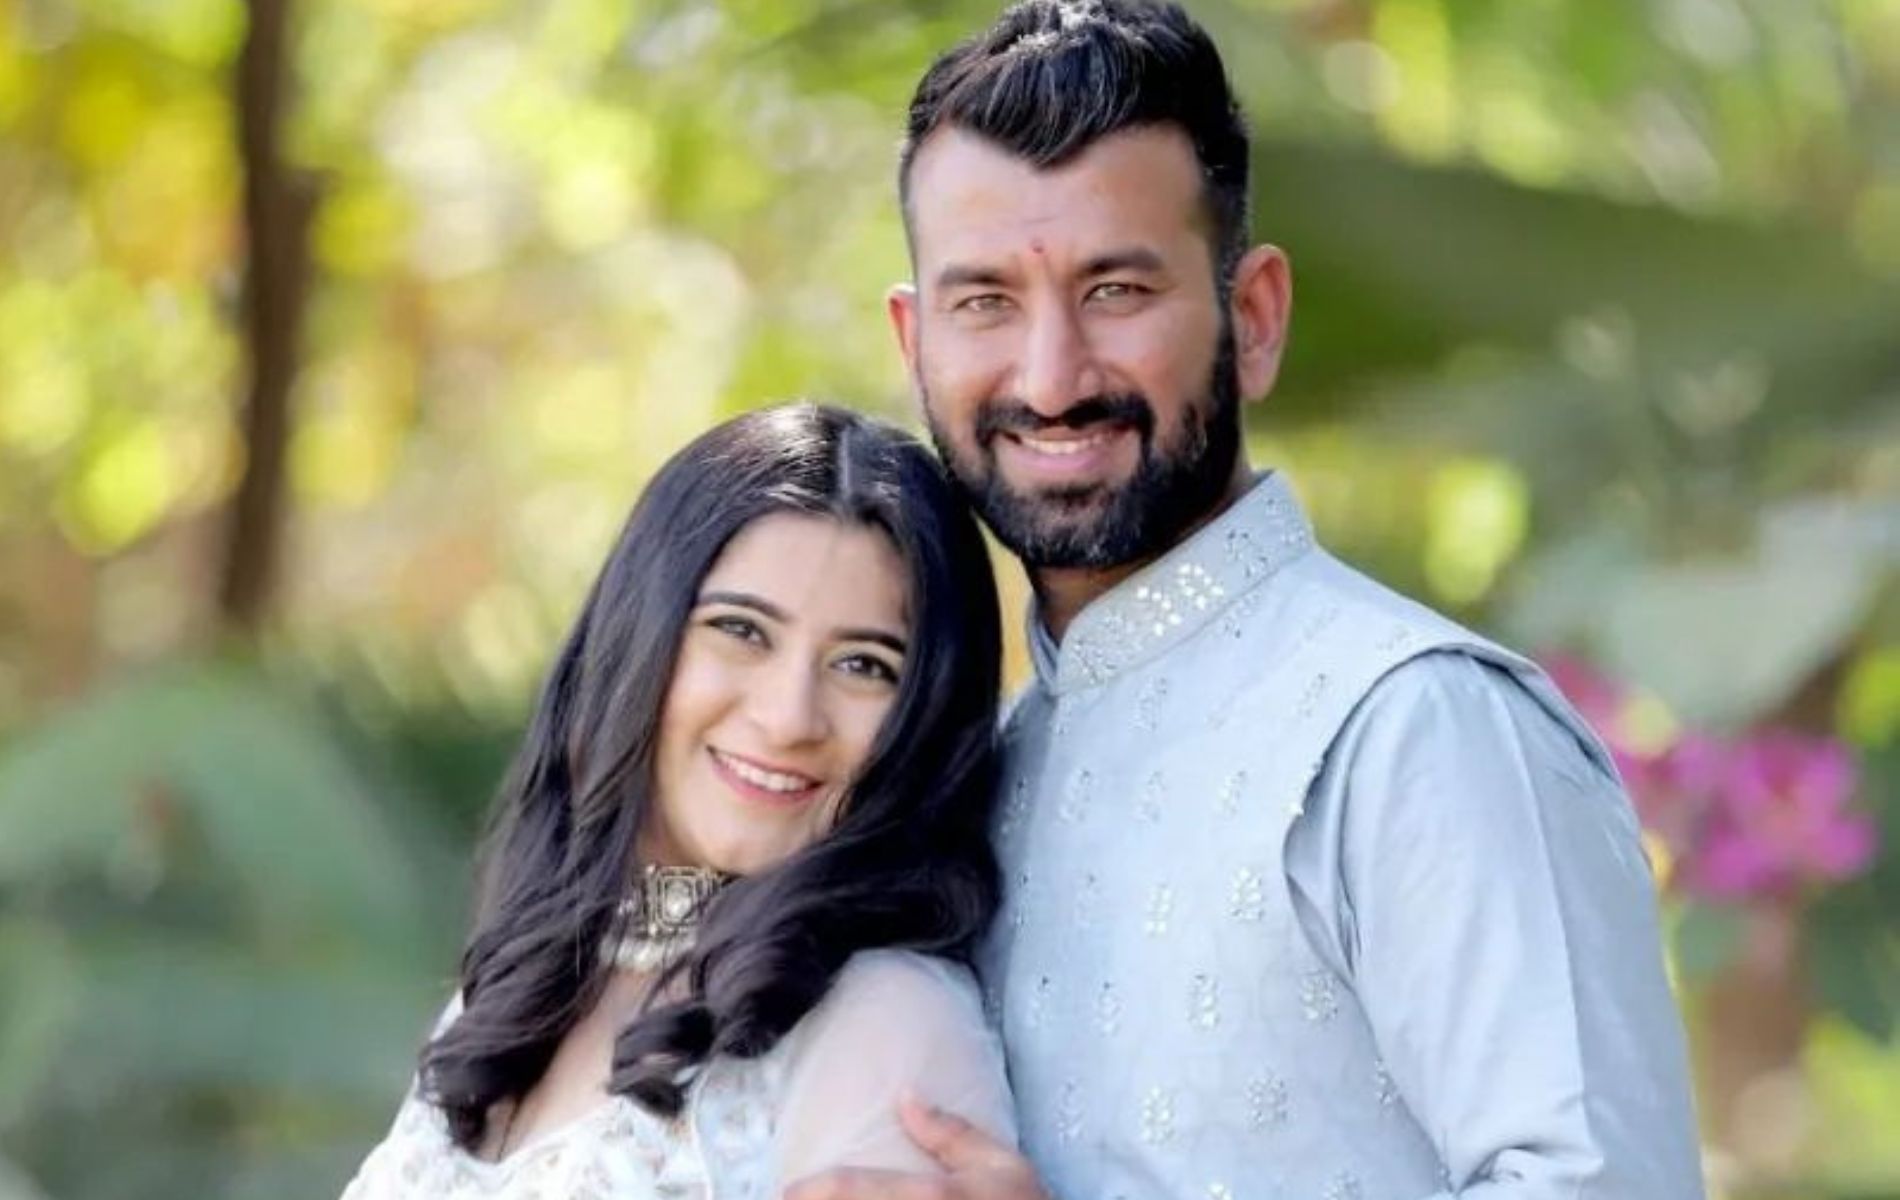 Cheteshwar Pujara (R) with his wife Puja. (Image source: Instagram)